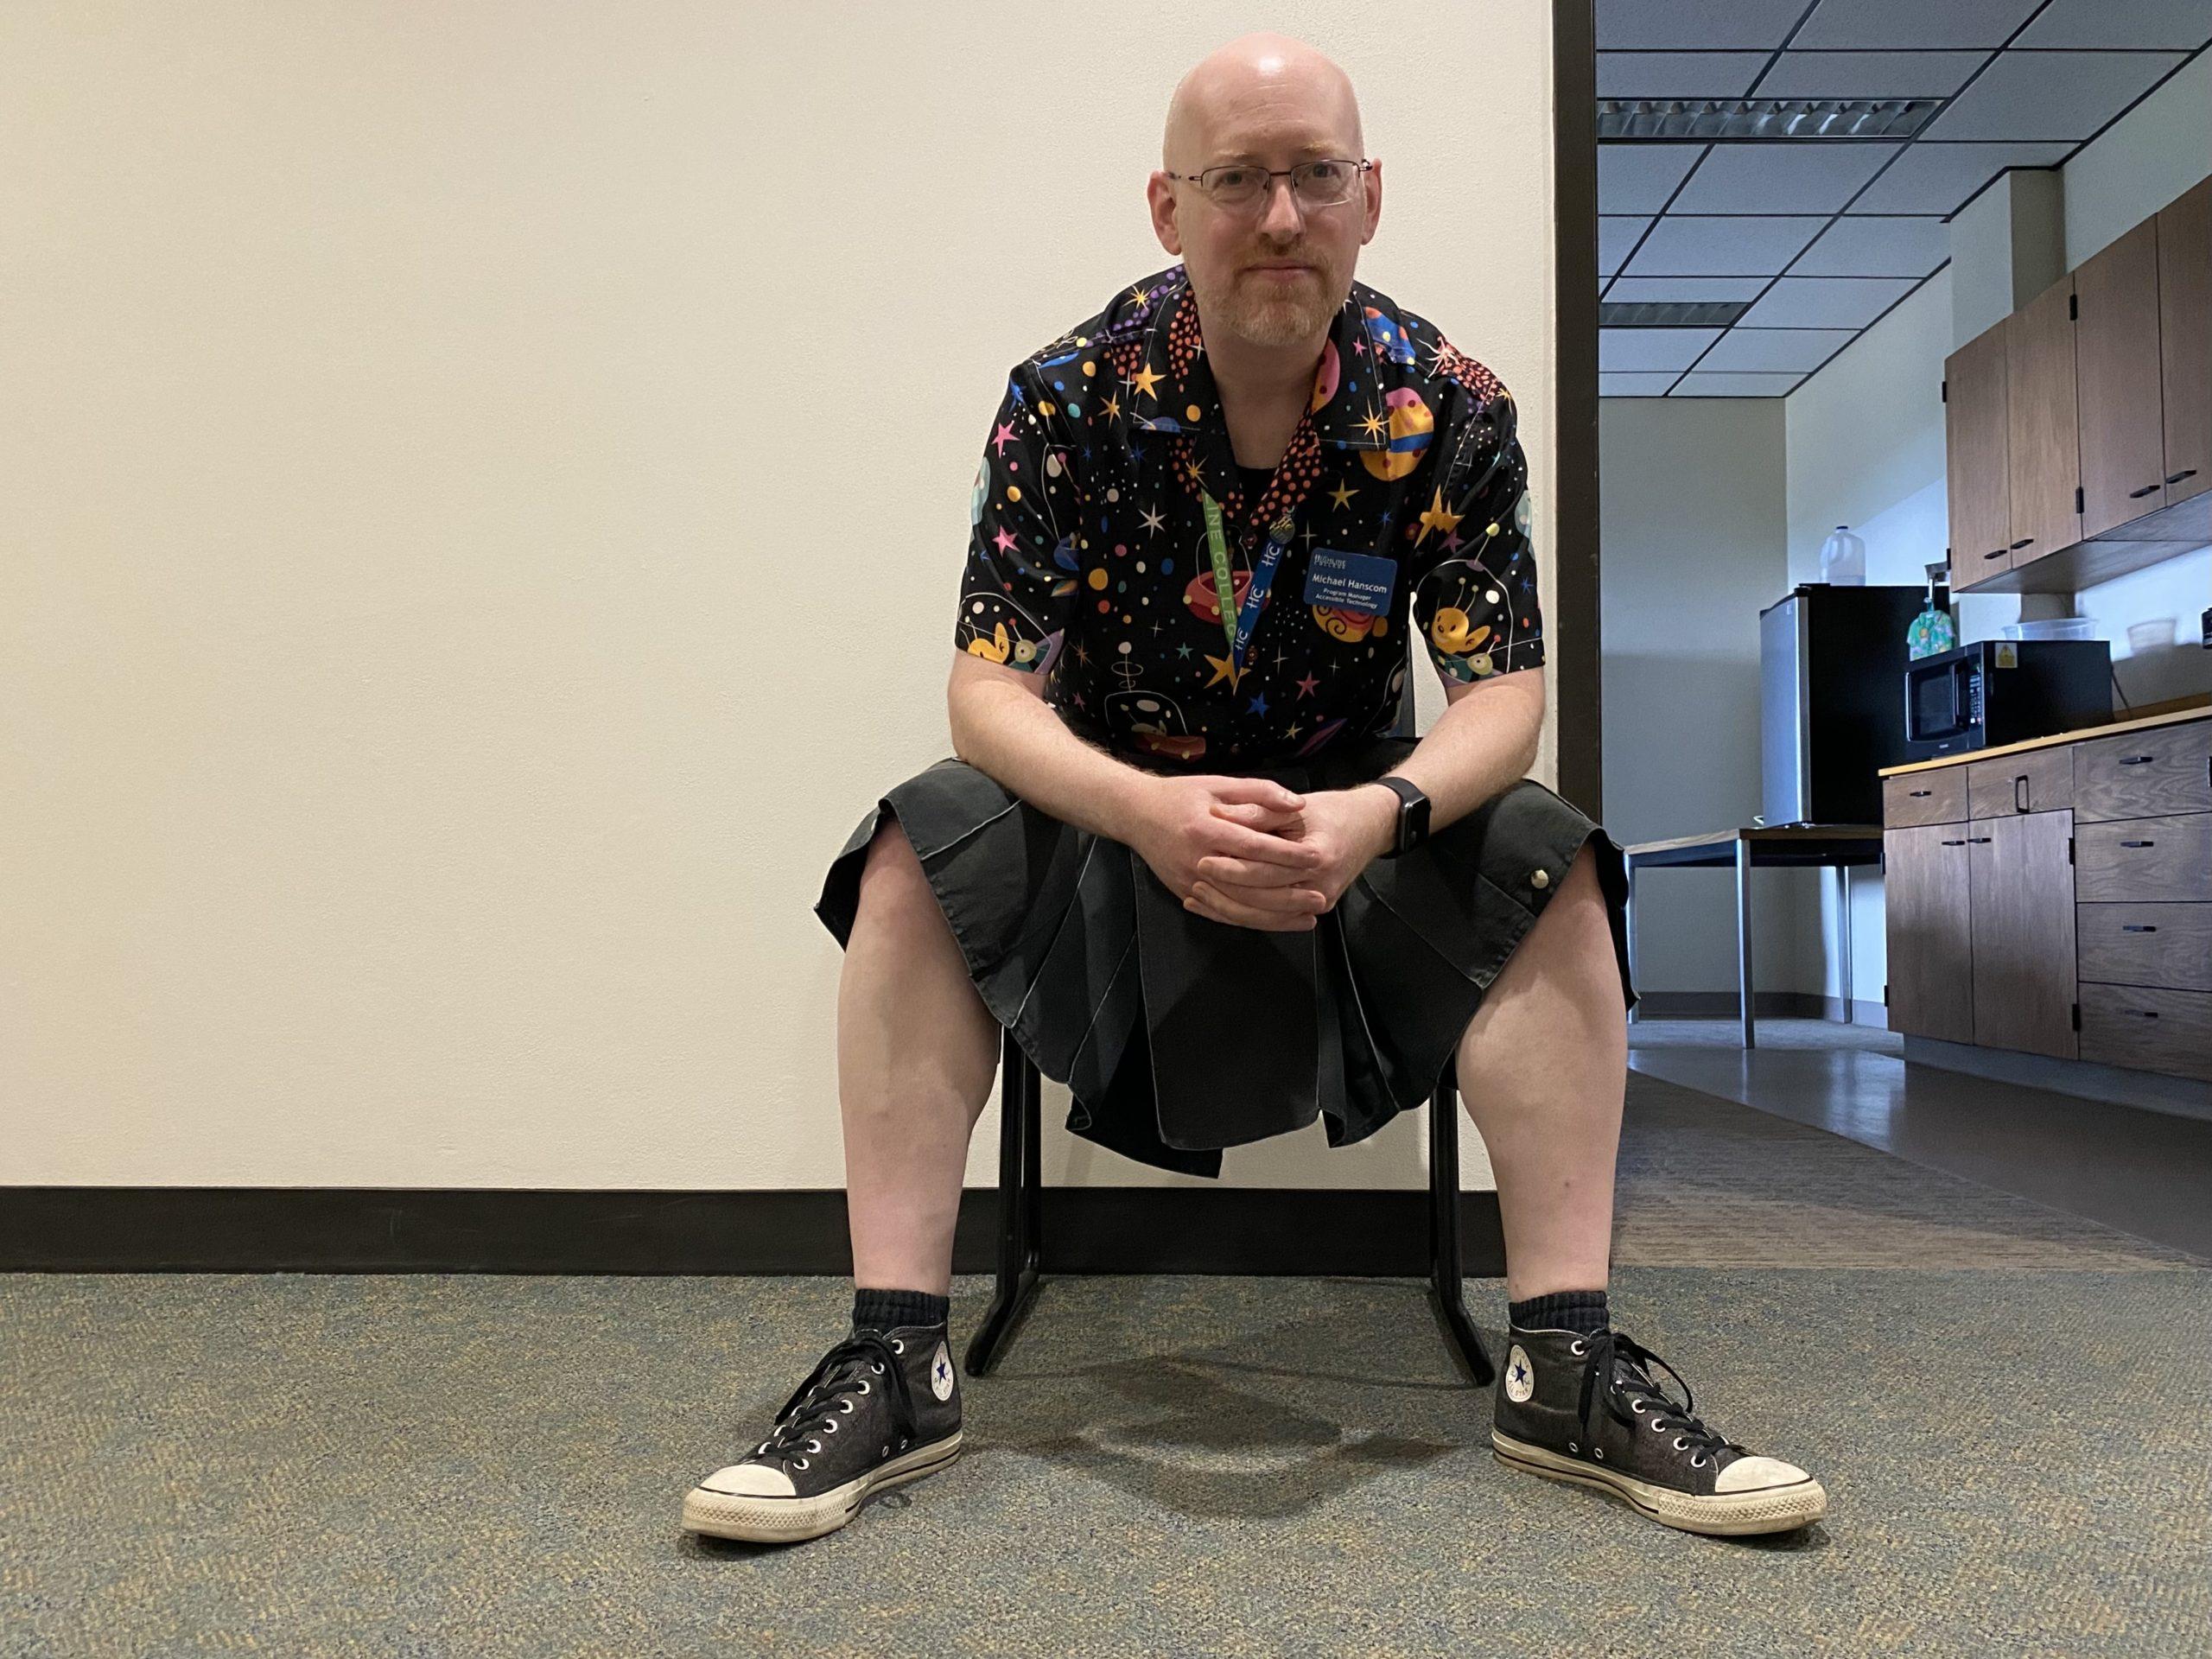 Me sitting on a chair in a hallway next to an open door to a breakroom. I'm leaning forward with my arms on my knees, wearing grey converse, a black kilt, and a black button-up short-sleeve shirt with a pattern of cartoon aliens.